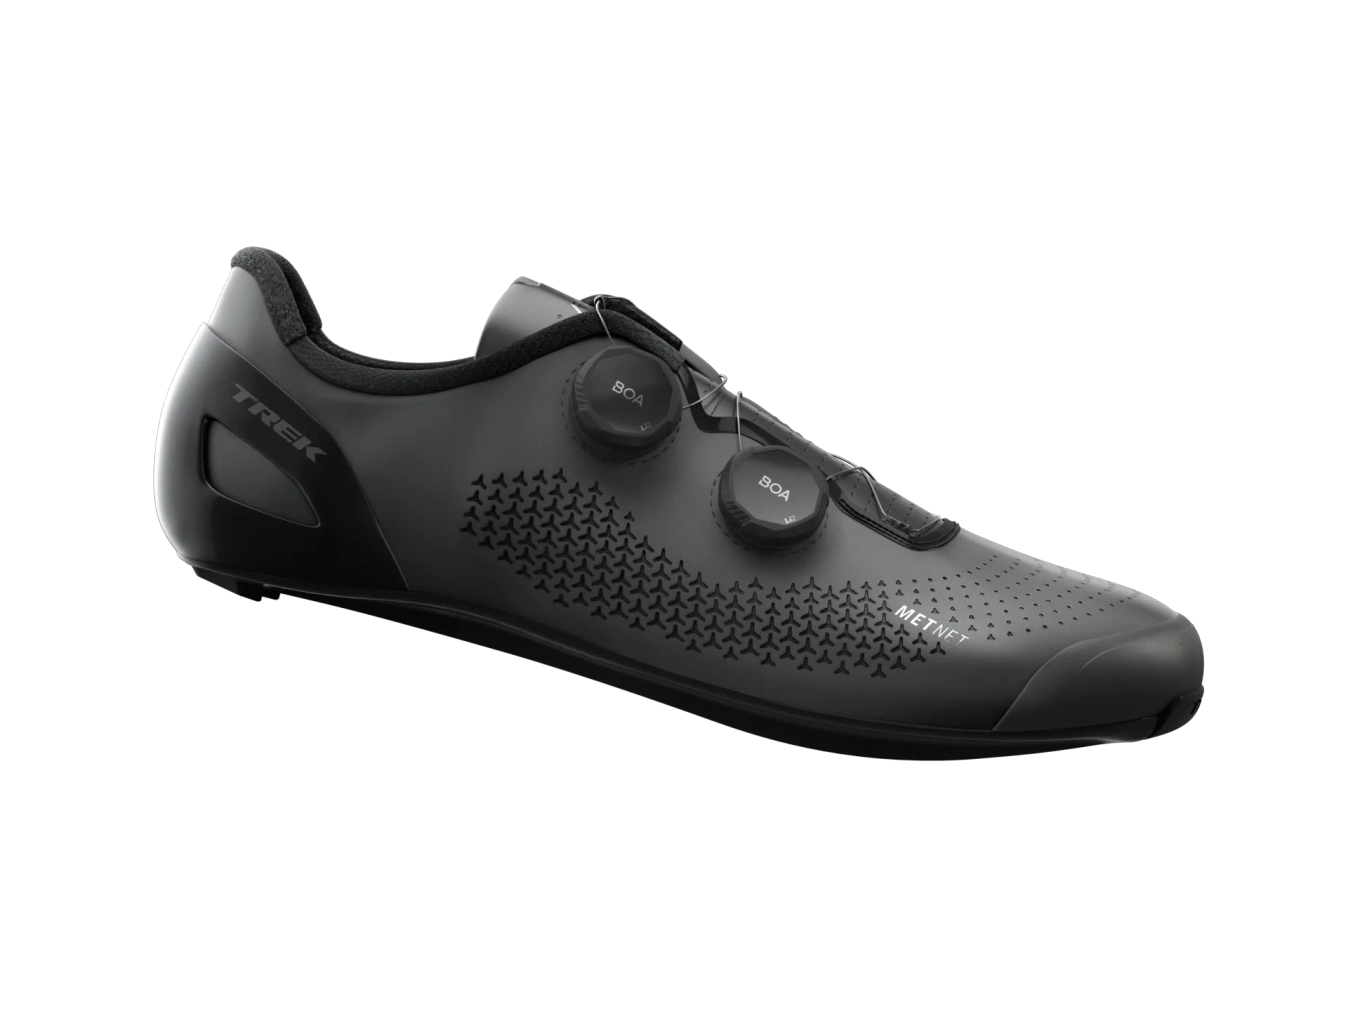 The Trek RSL Road shoes will also be used by Lidl-Trek riders